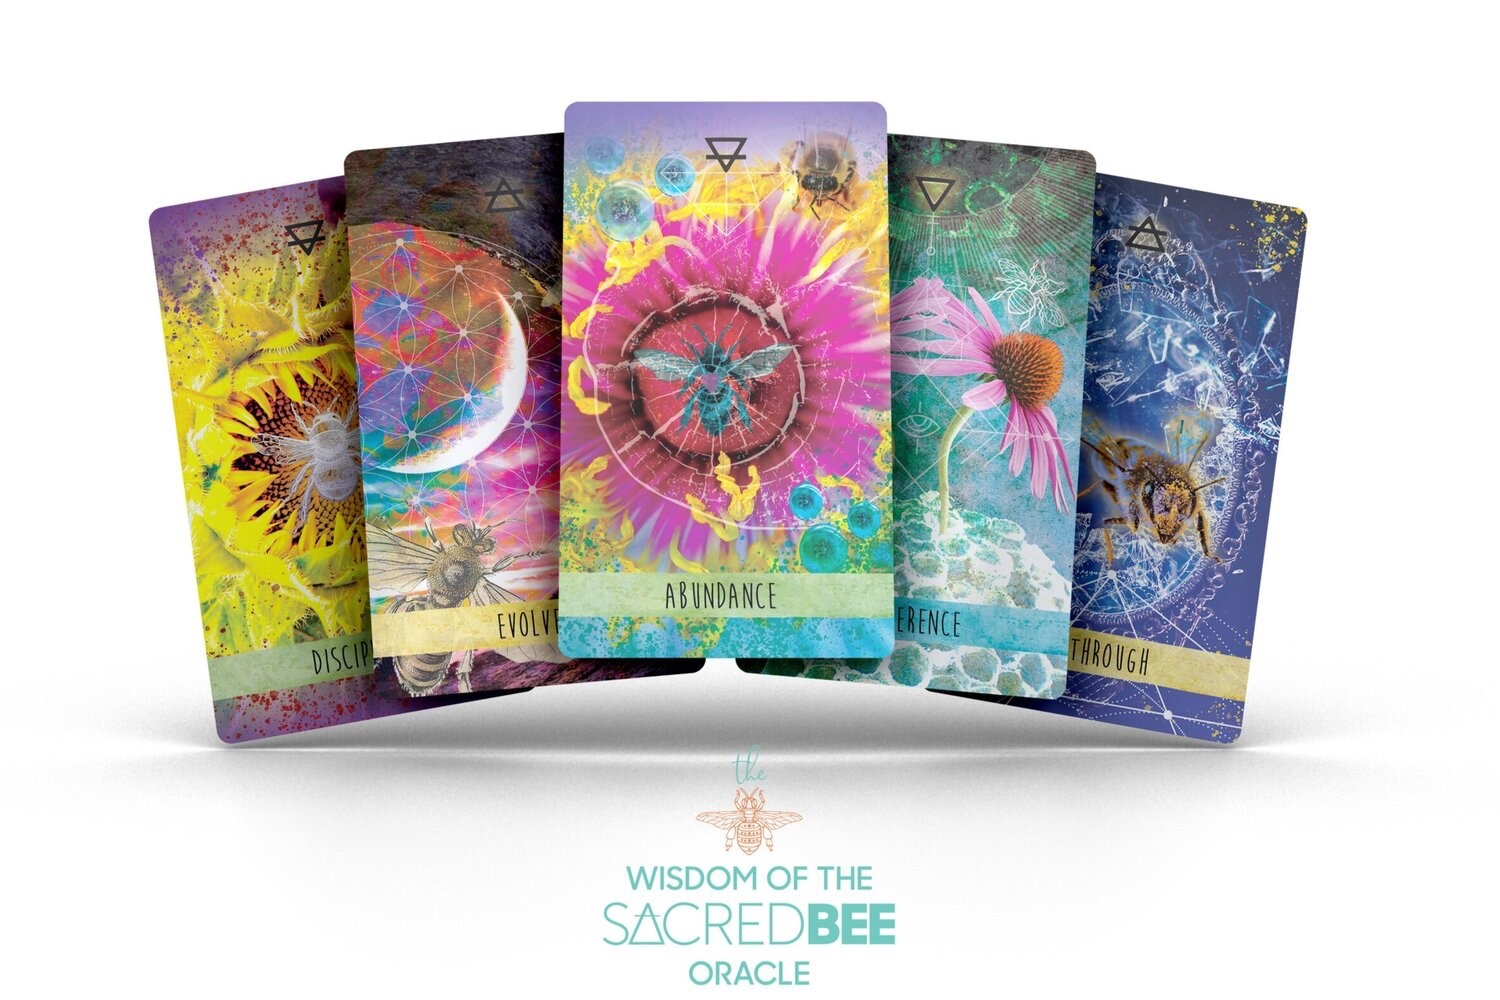 WISDOM OF THE SACRED BEE ORACLE CARDS BY KELLY BURTON